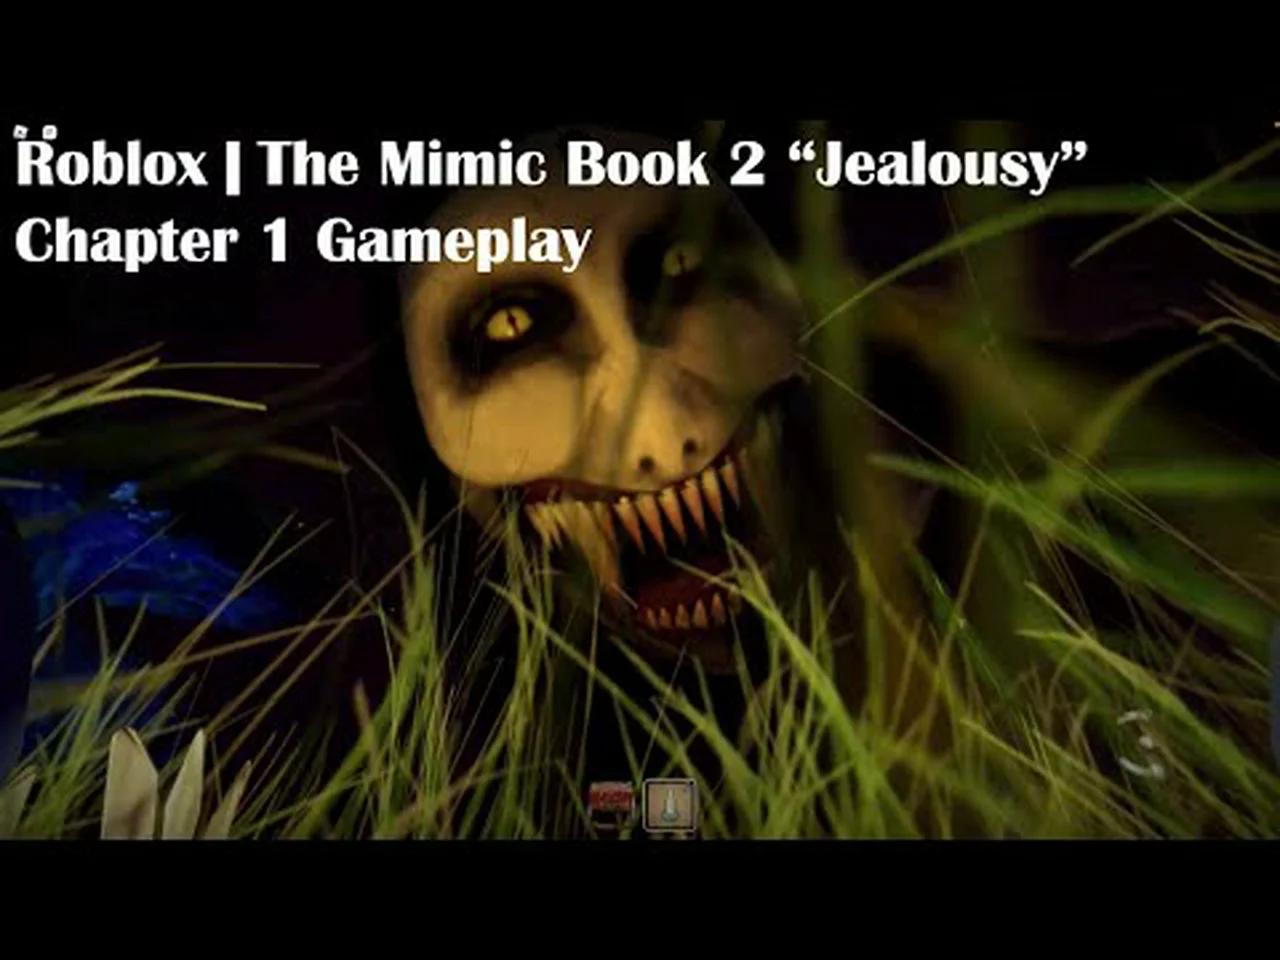 The Mimic - Book 2 Jealousy - Chapter 1 Normal mode - Full Gameplay - Solo  